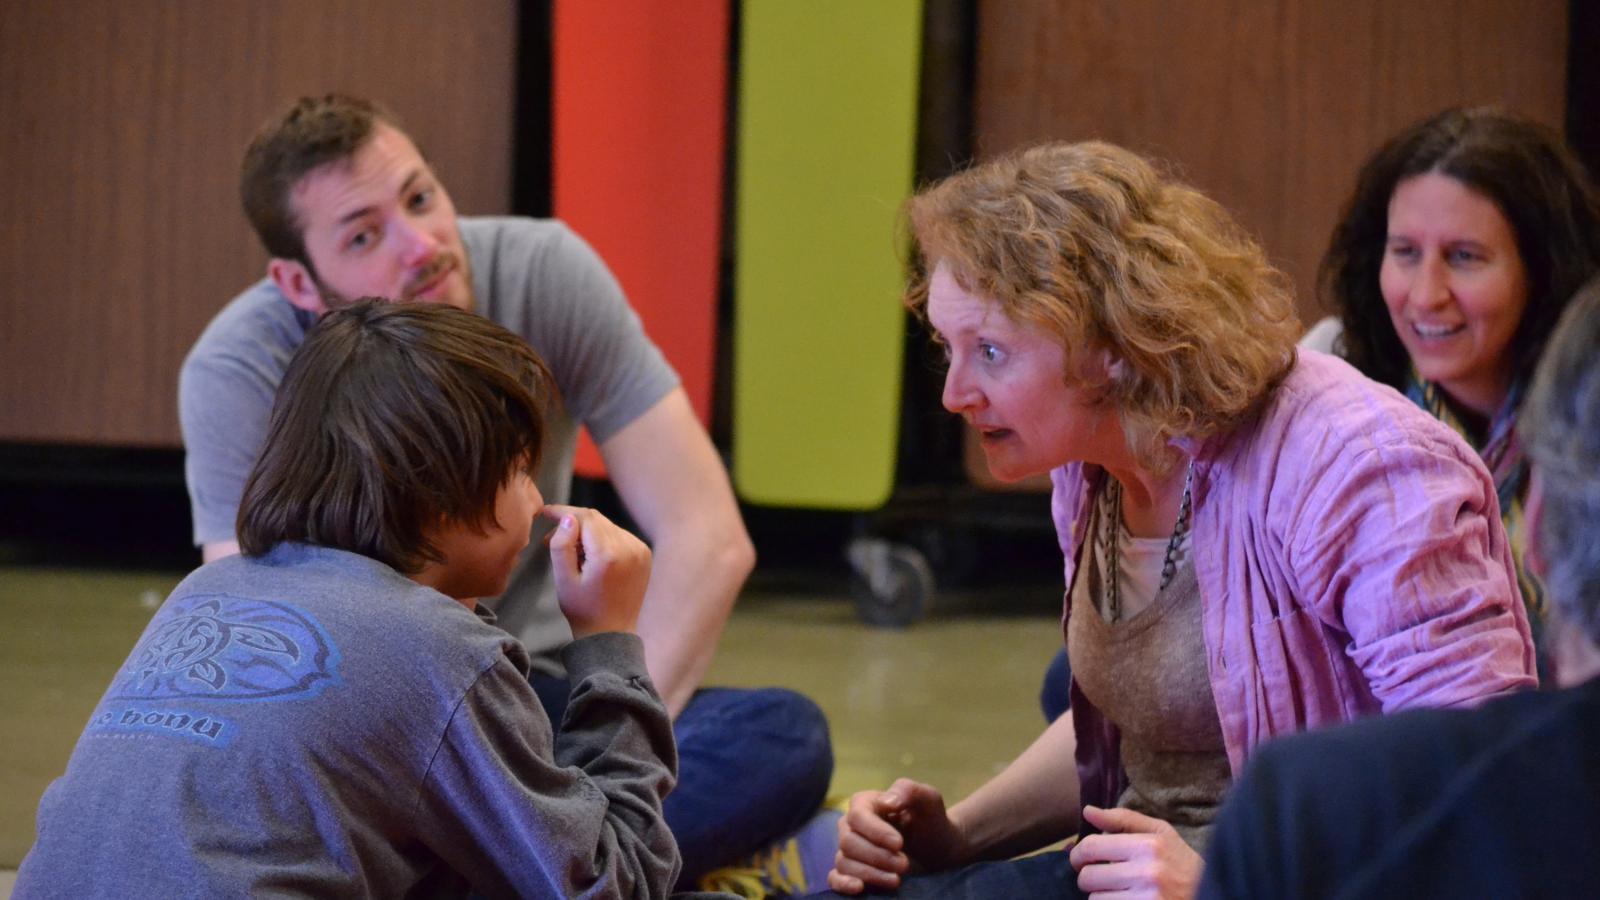 Guest artist Kelly Hunter works with a child during a workshop.